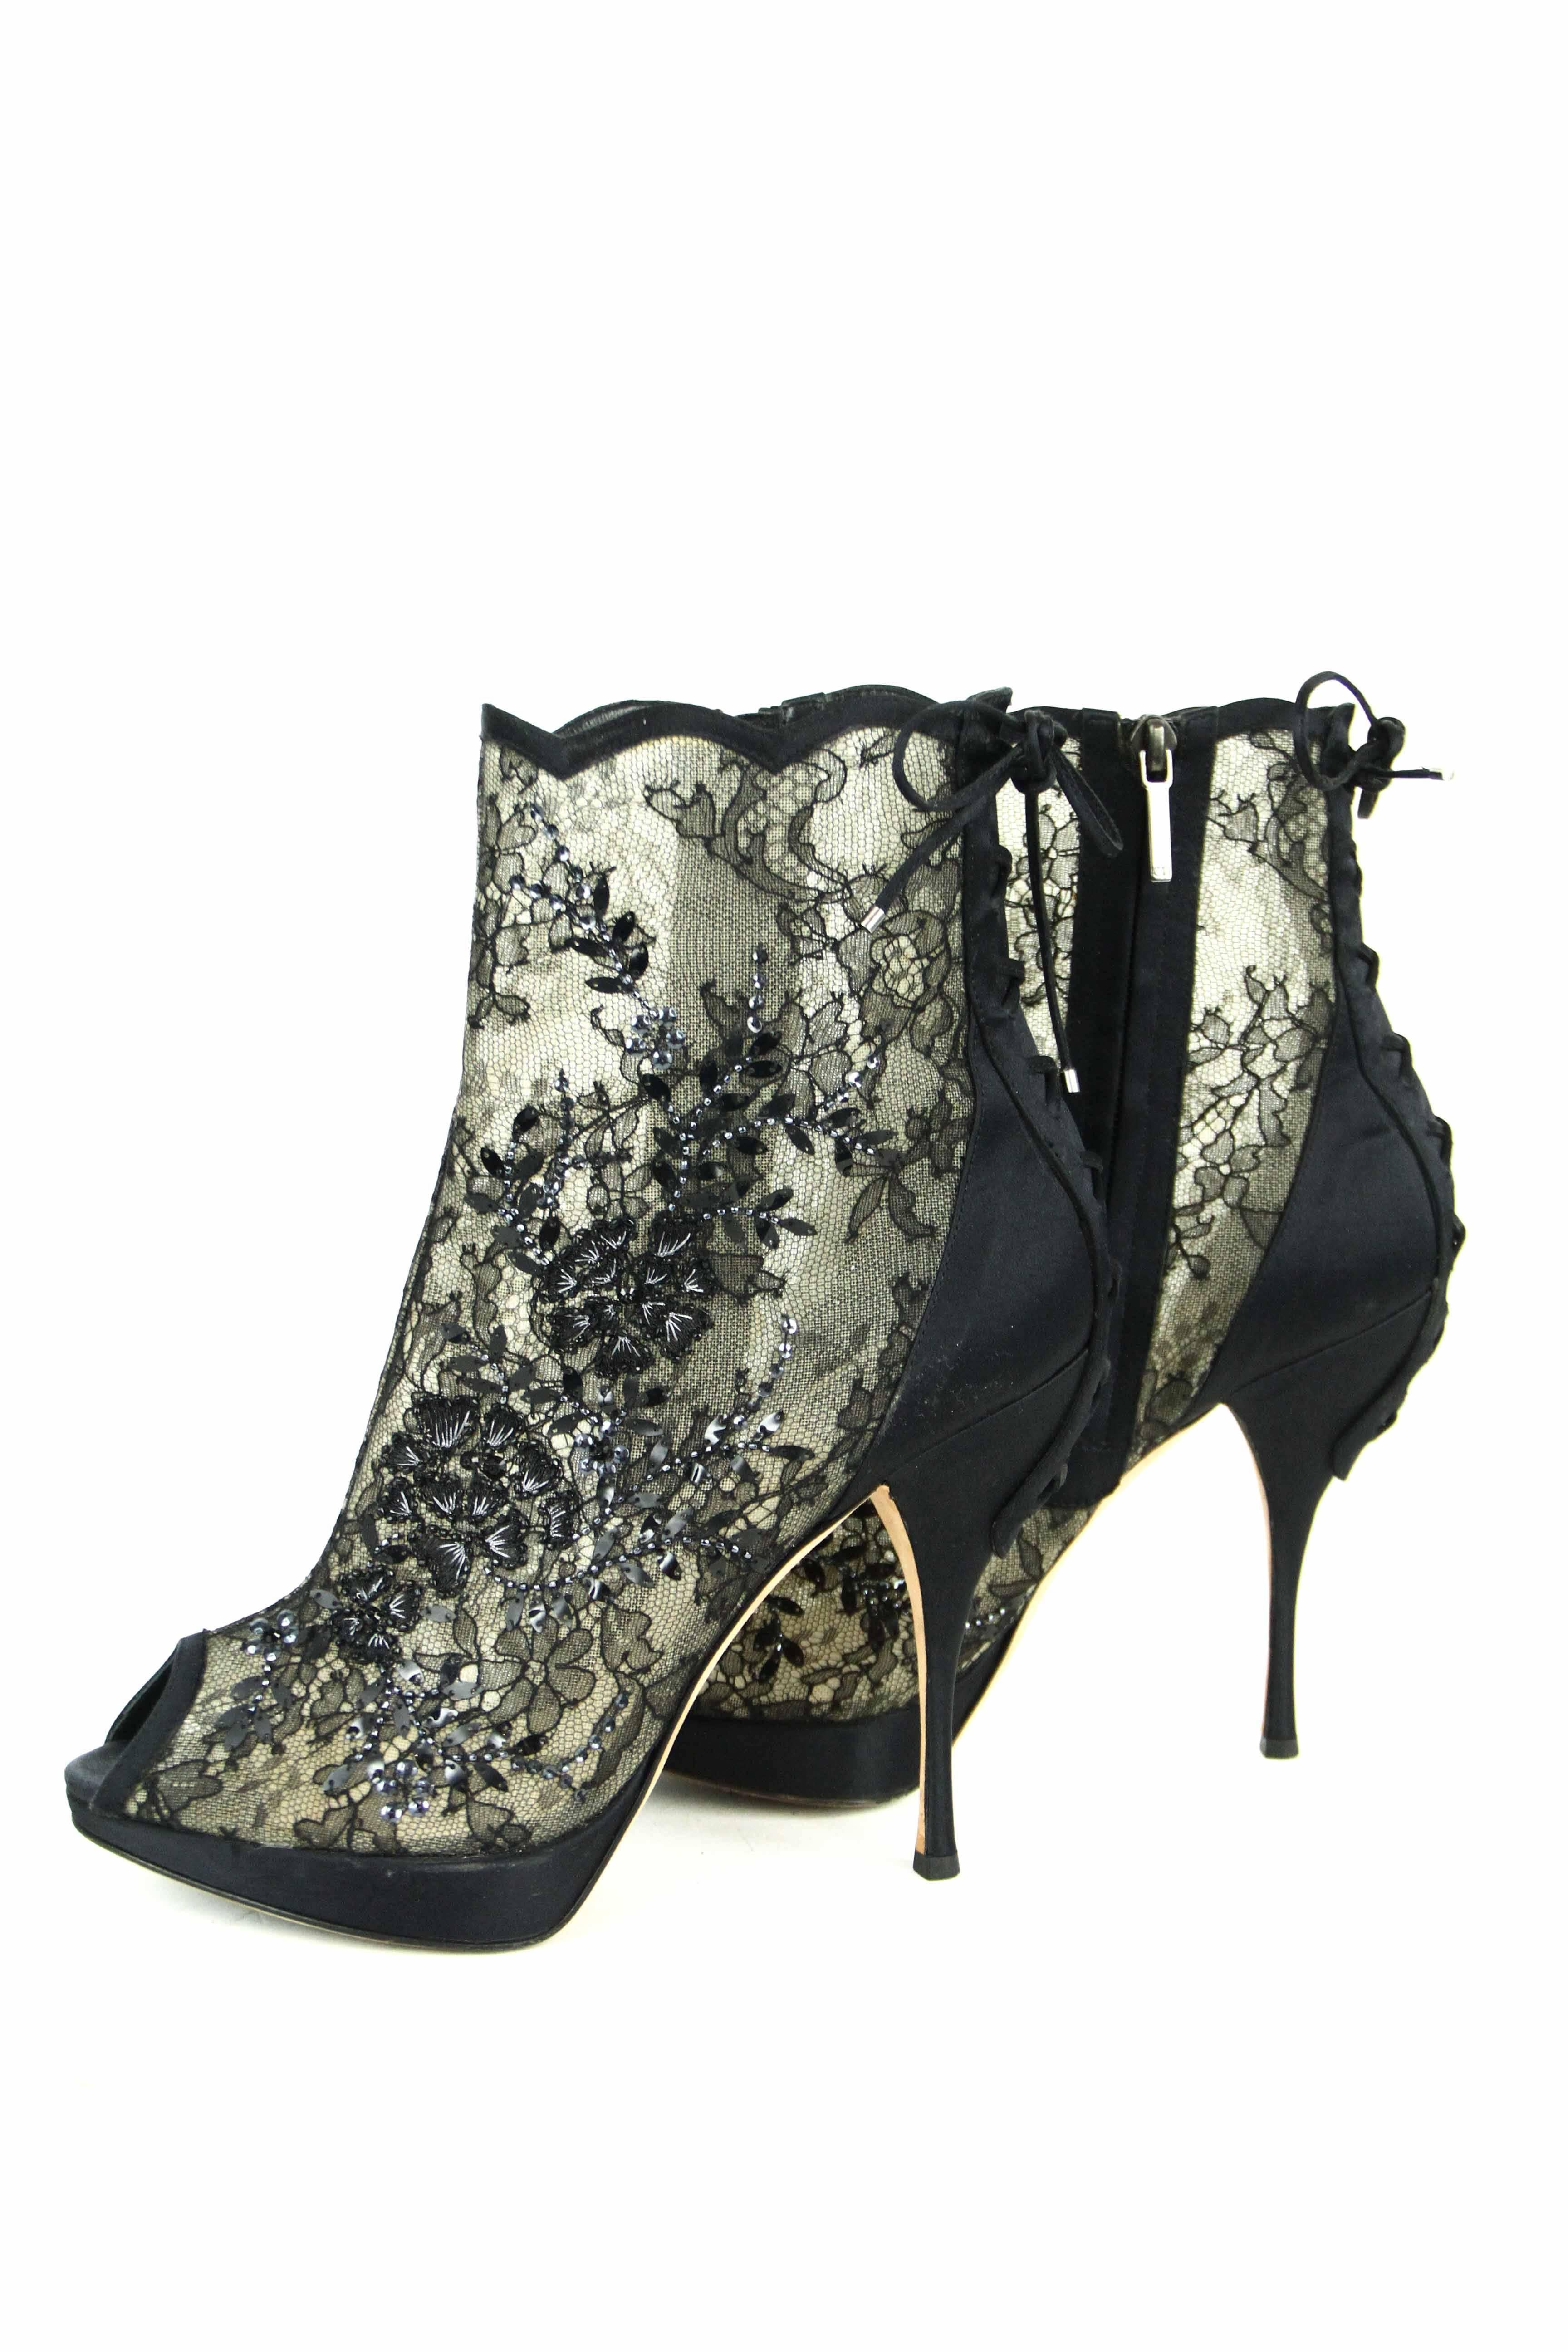 CHRISTIAN DIOR Beaded Lace Open Toe Platform Bootie 39.5  2